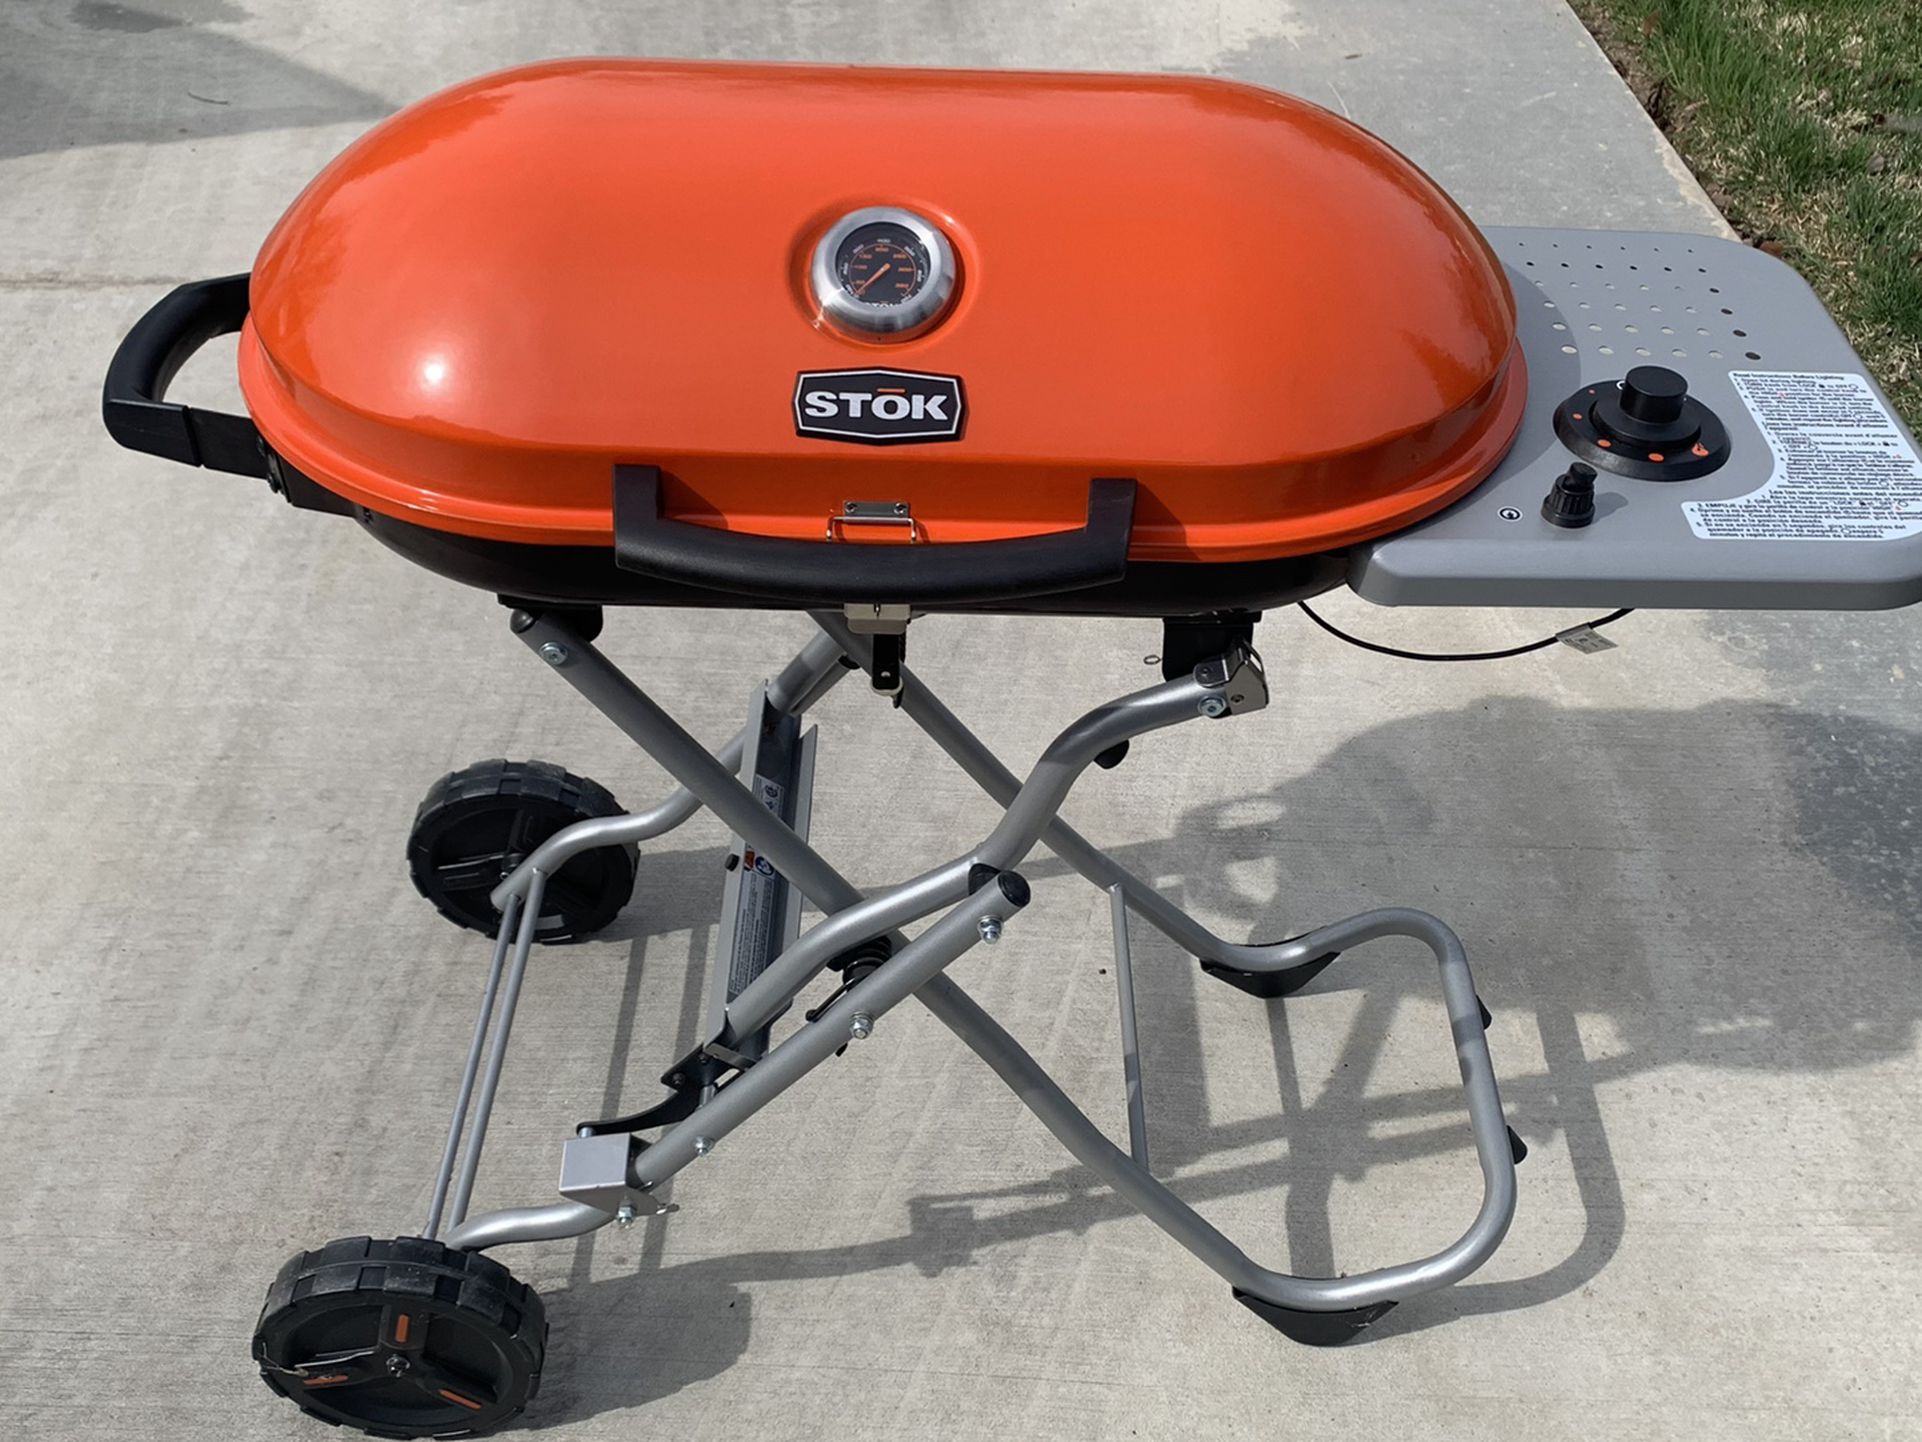 Stok Gridiron 348 Sq. In. 1-Burner Portable Propane Gas Grill in Black/Orange with Insert System